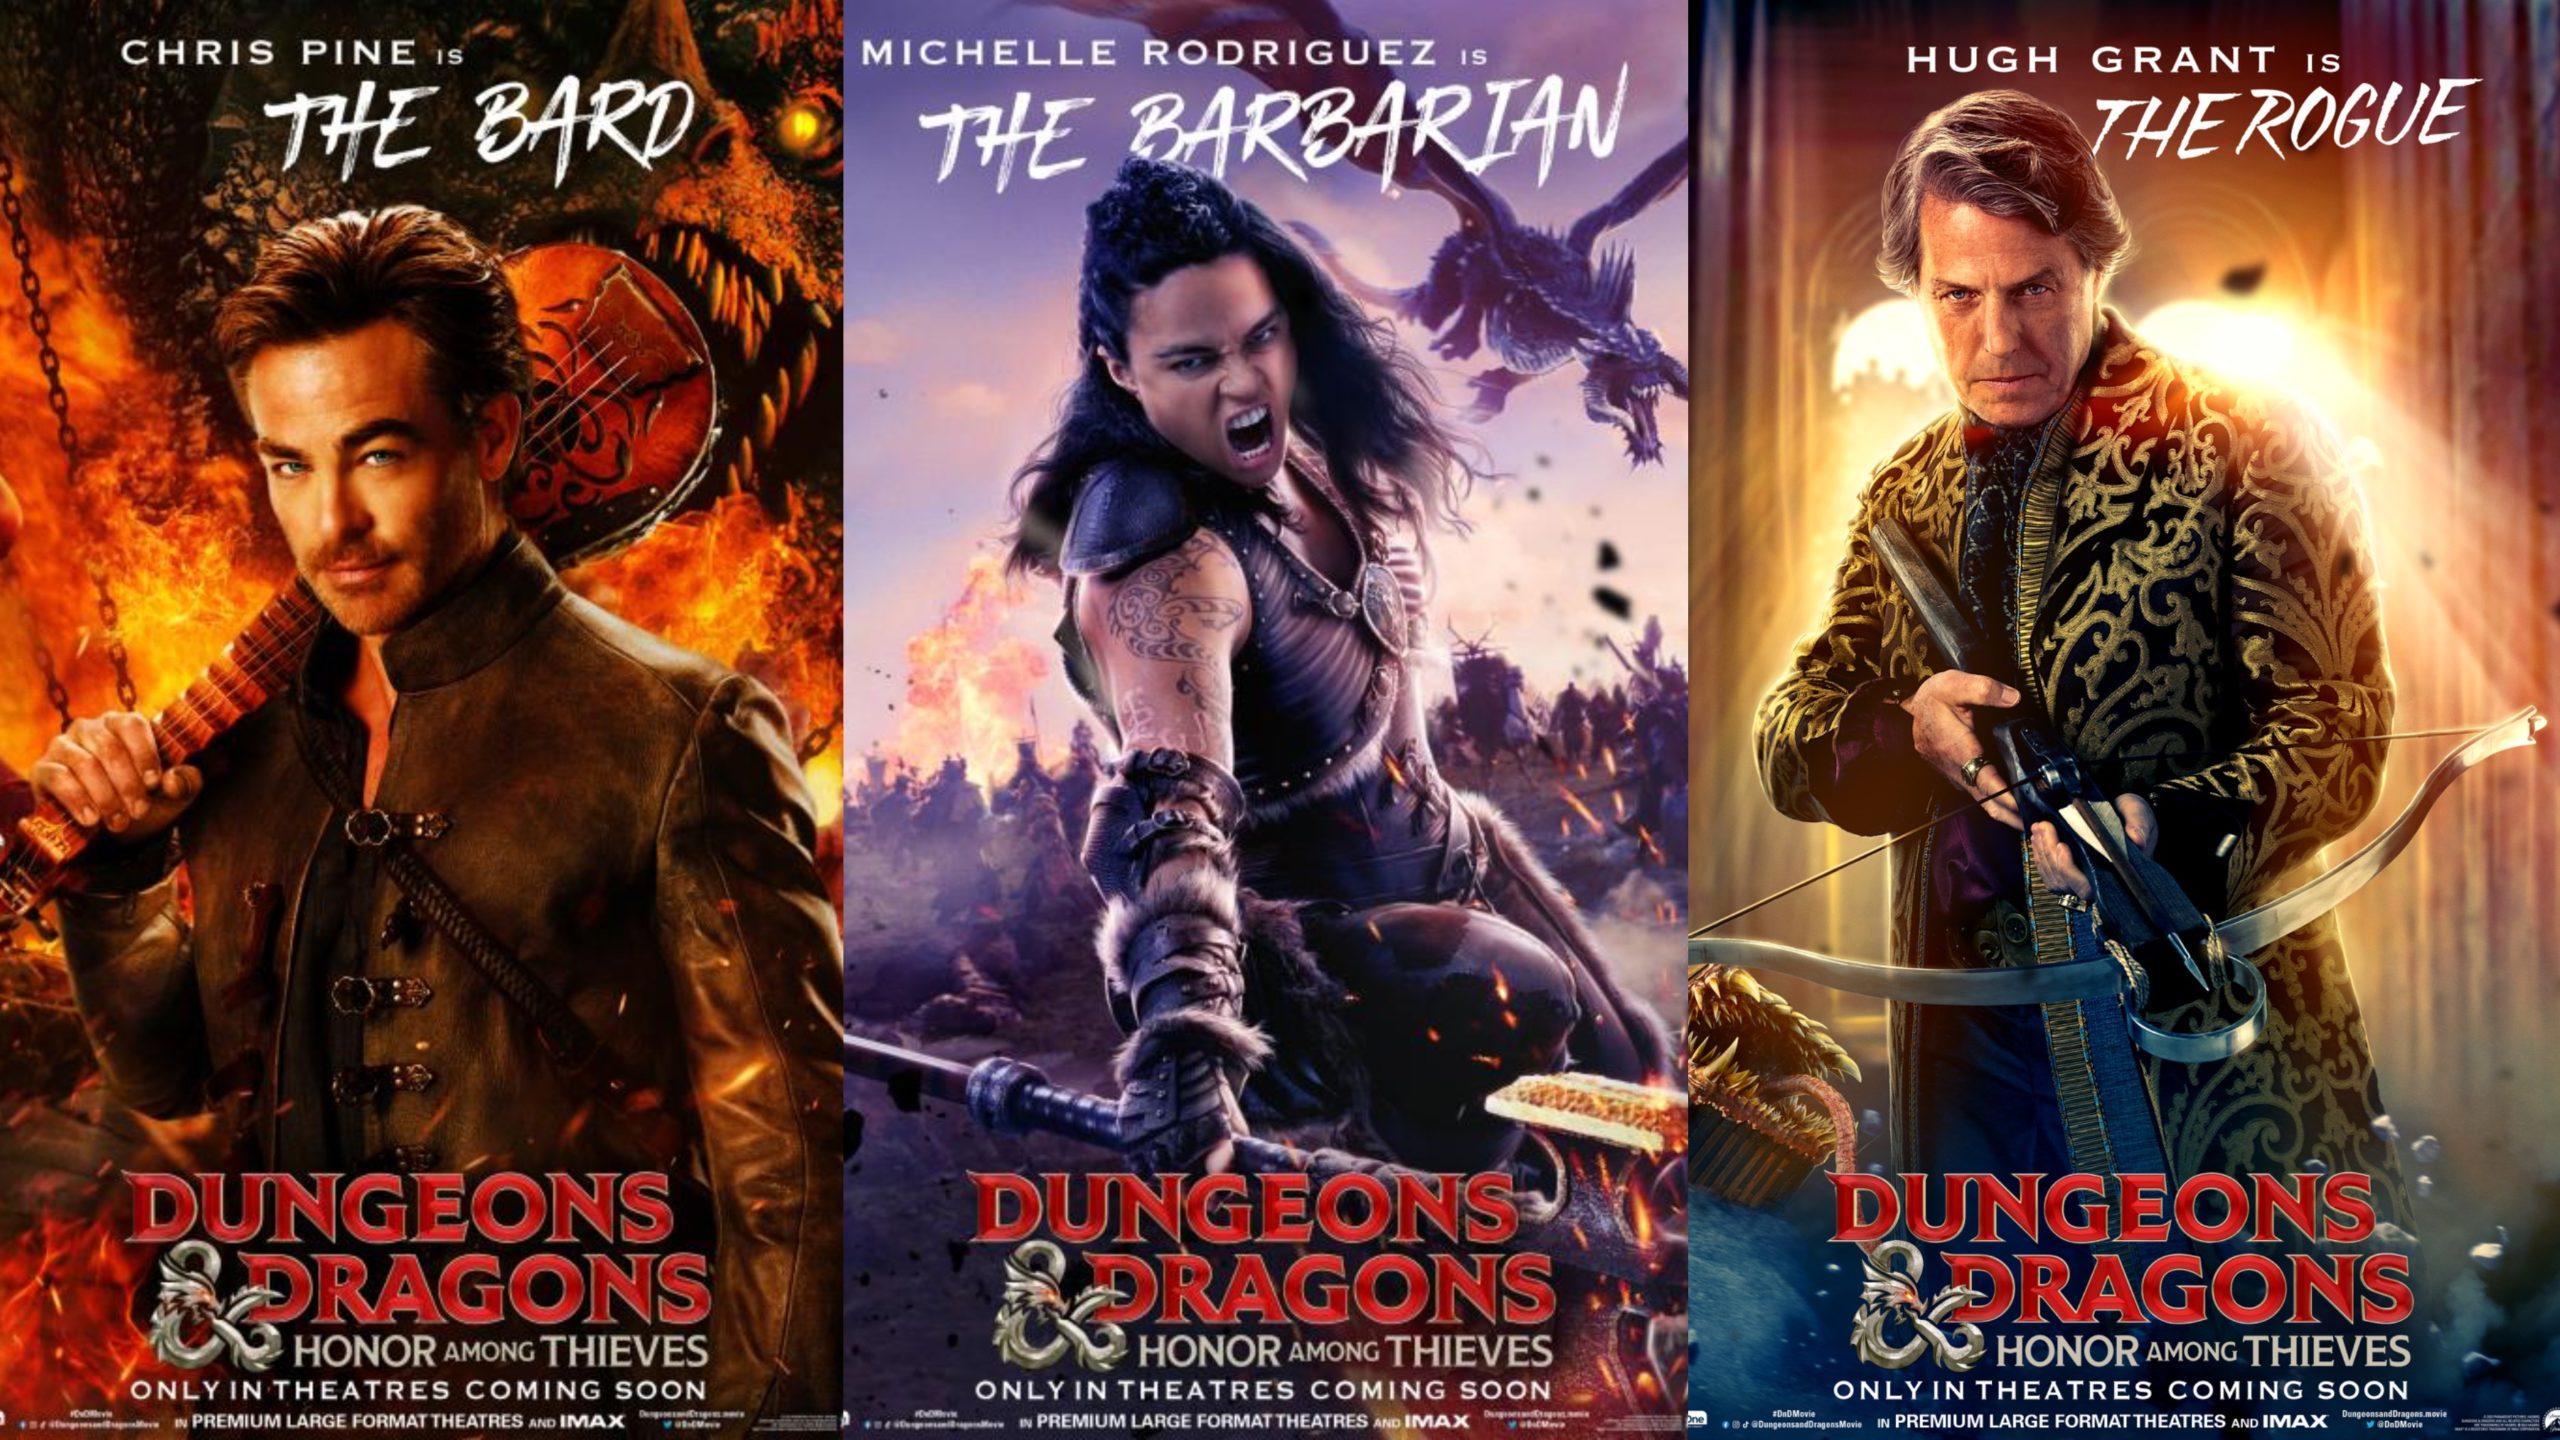 See The New International and Character Posters For Dungeons & Dragons: Honor Among Thieves, In Theaters on March 2023 #DnDMovie